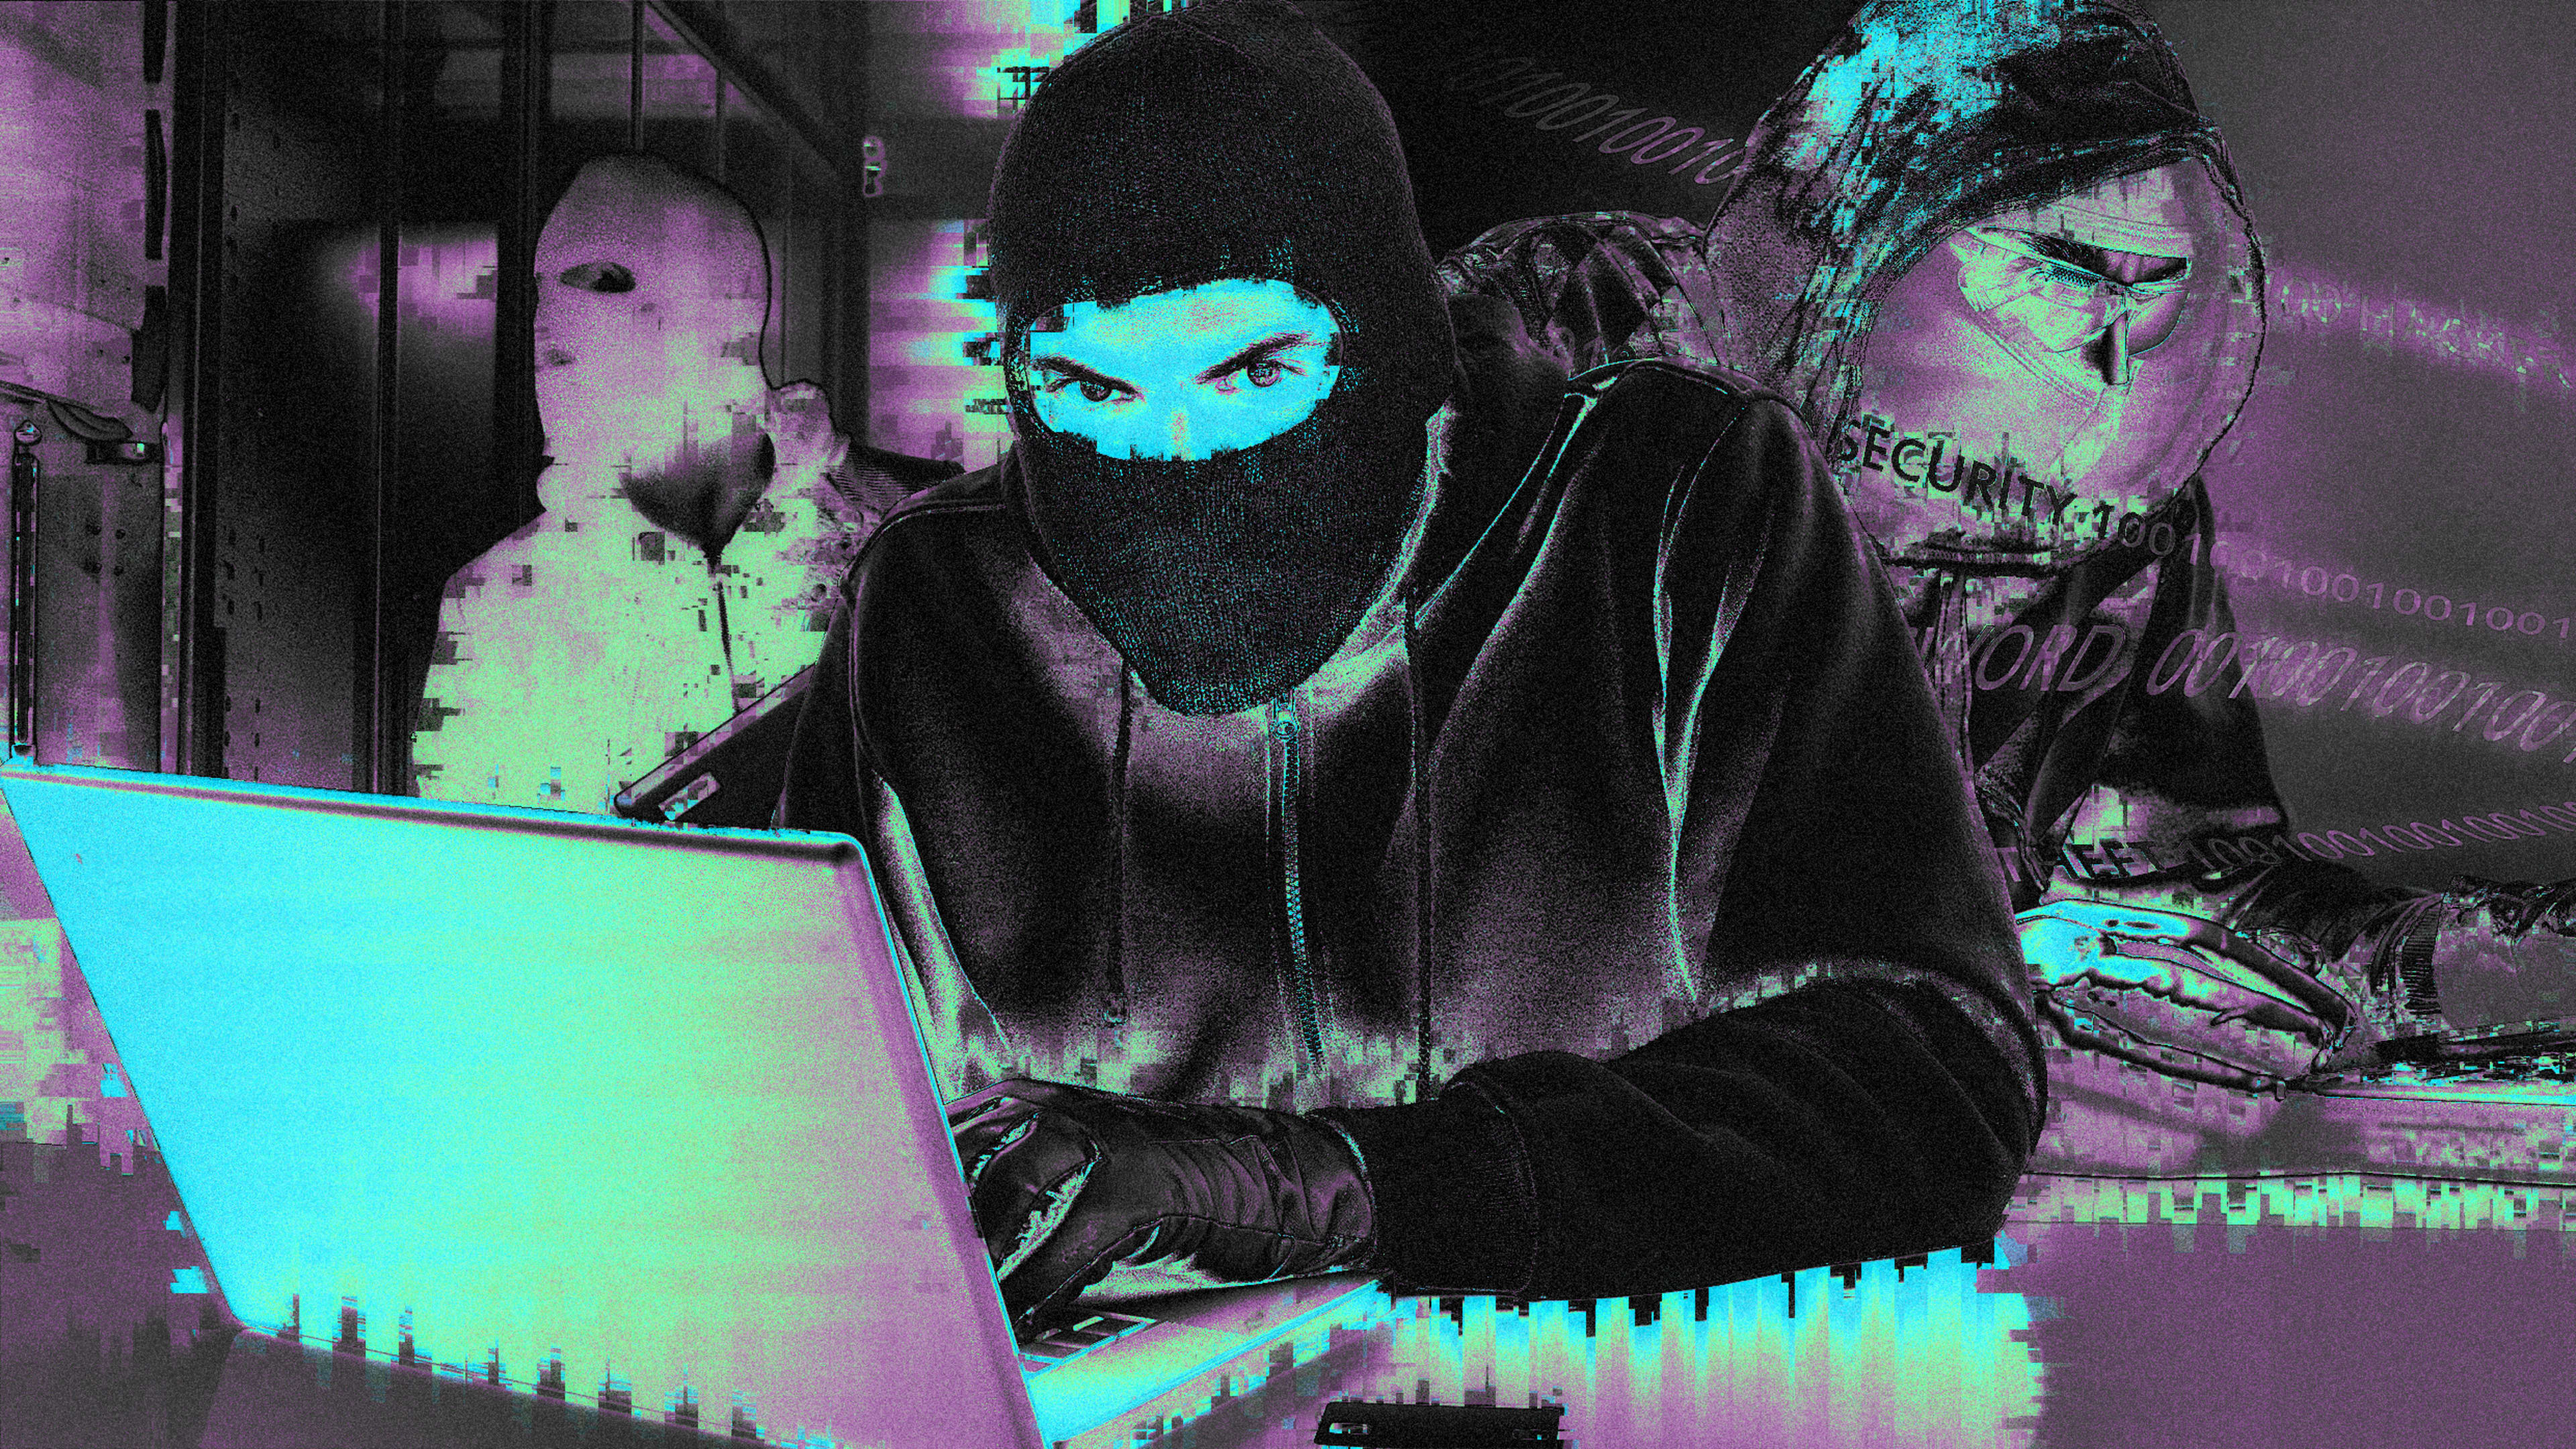 Stock photos of hackers are hilariously bad. OpenIdeo wants you to redesign them